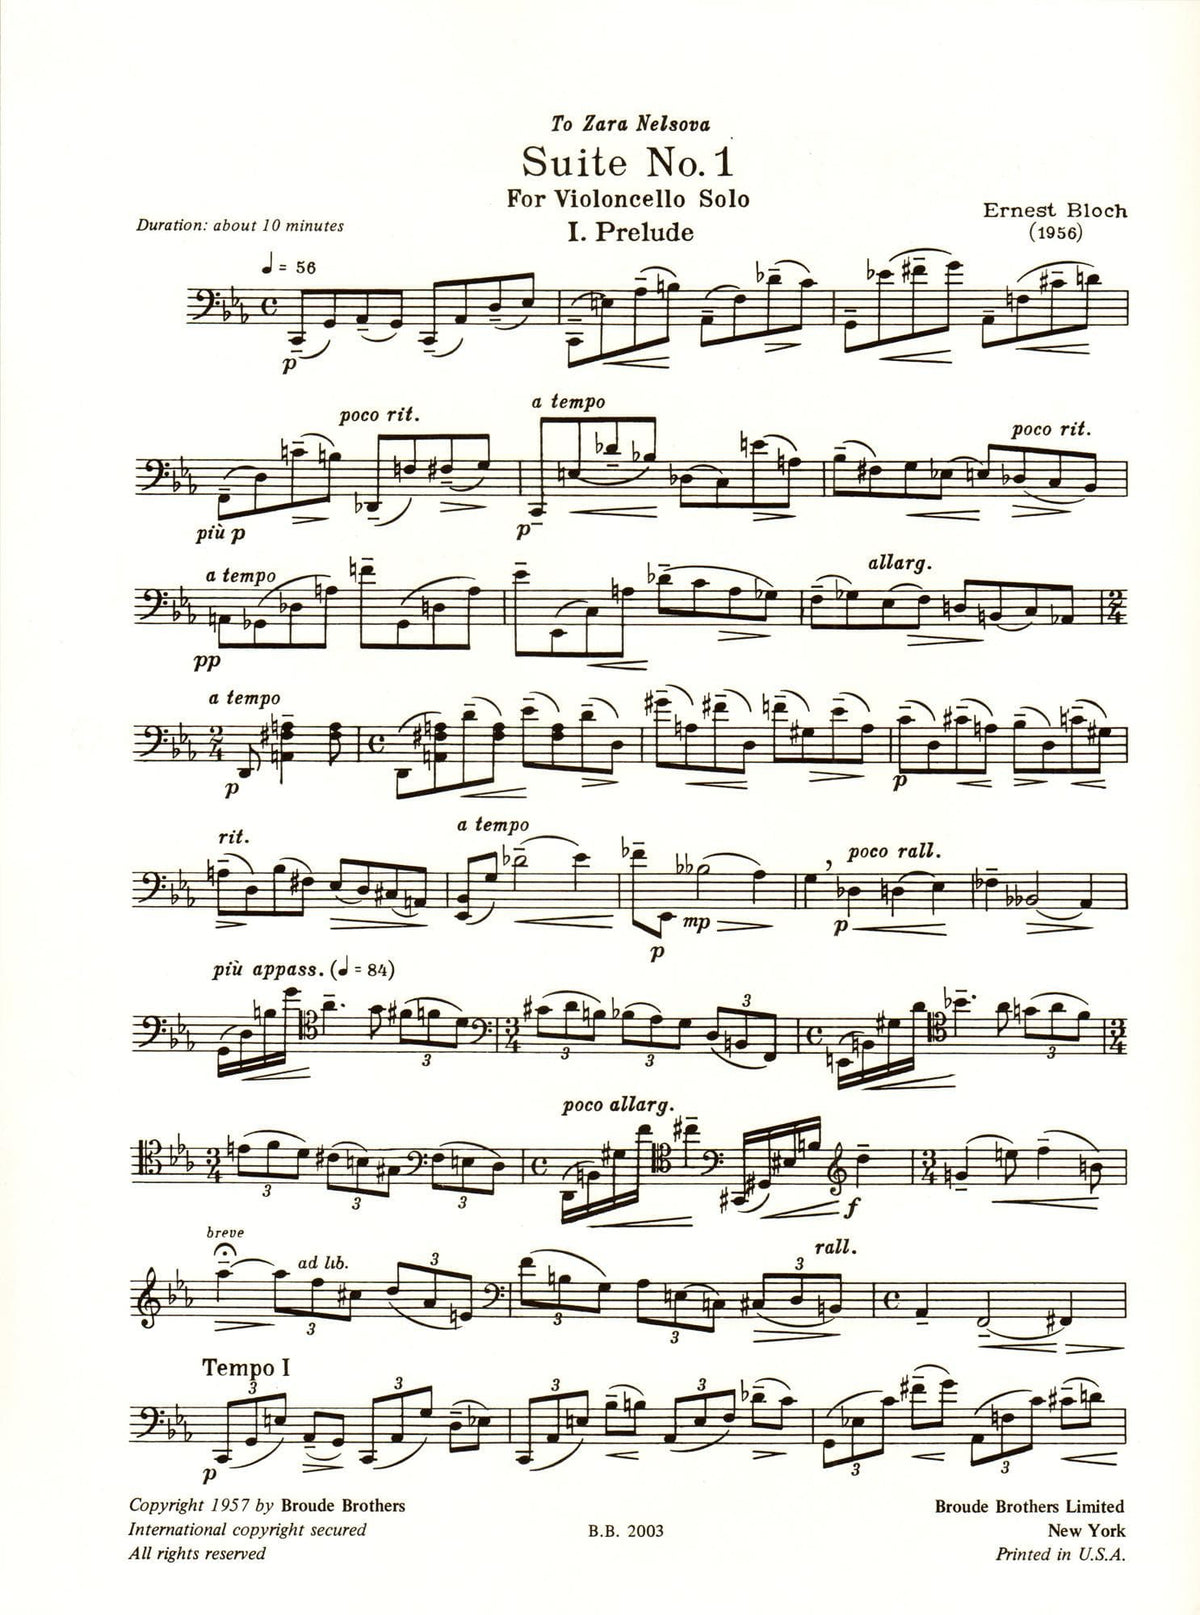 Bloch, Ernest - Suite No 1 for Cello (1956) - Broude Brothers Edition